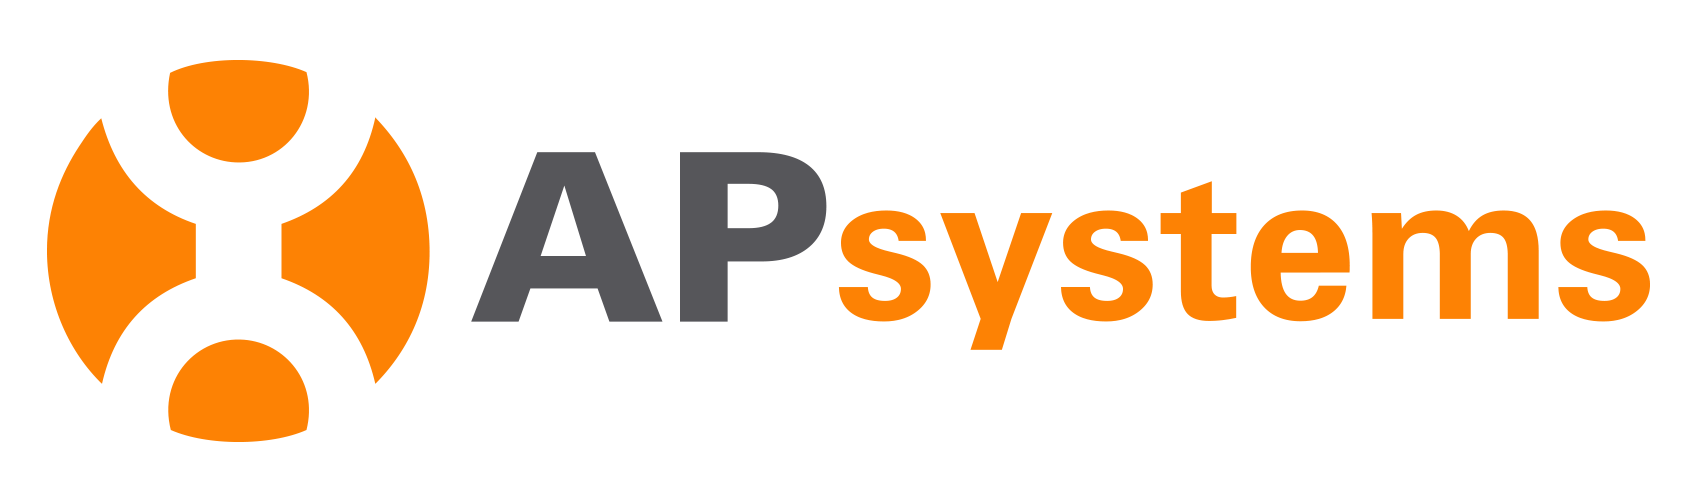 APsystems USA |  The global leader in multi-platform MLPE technology